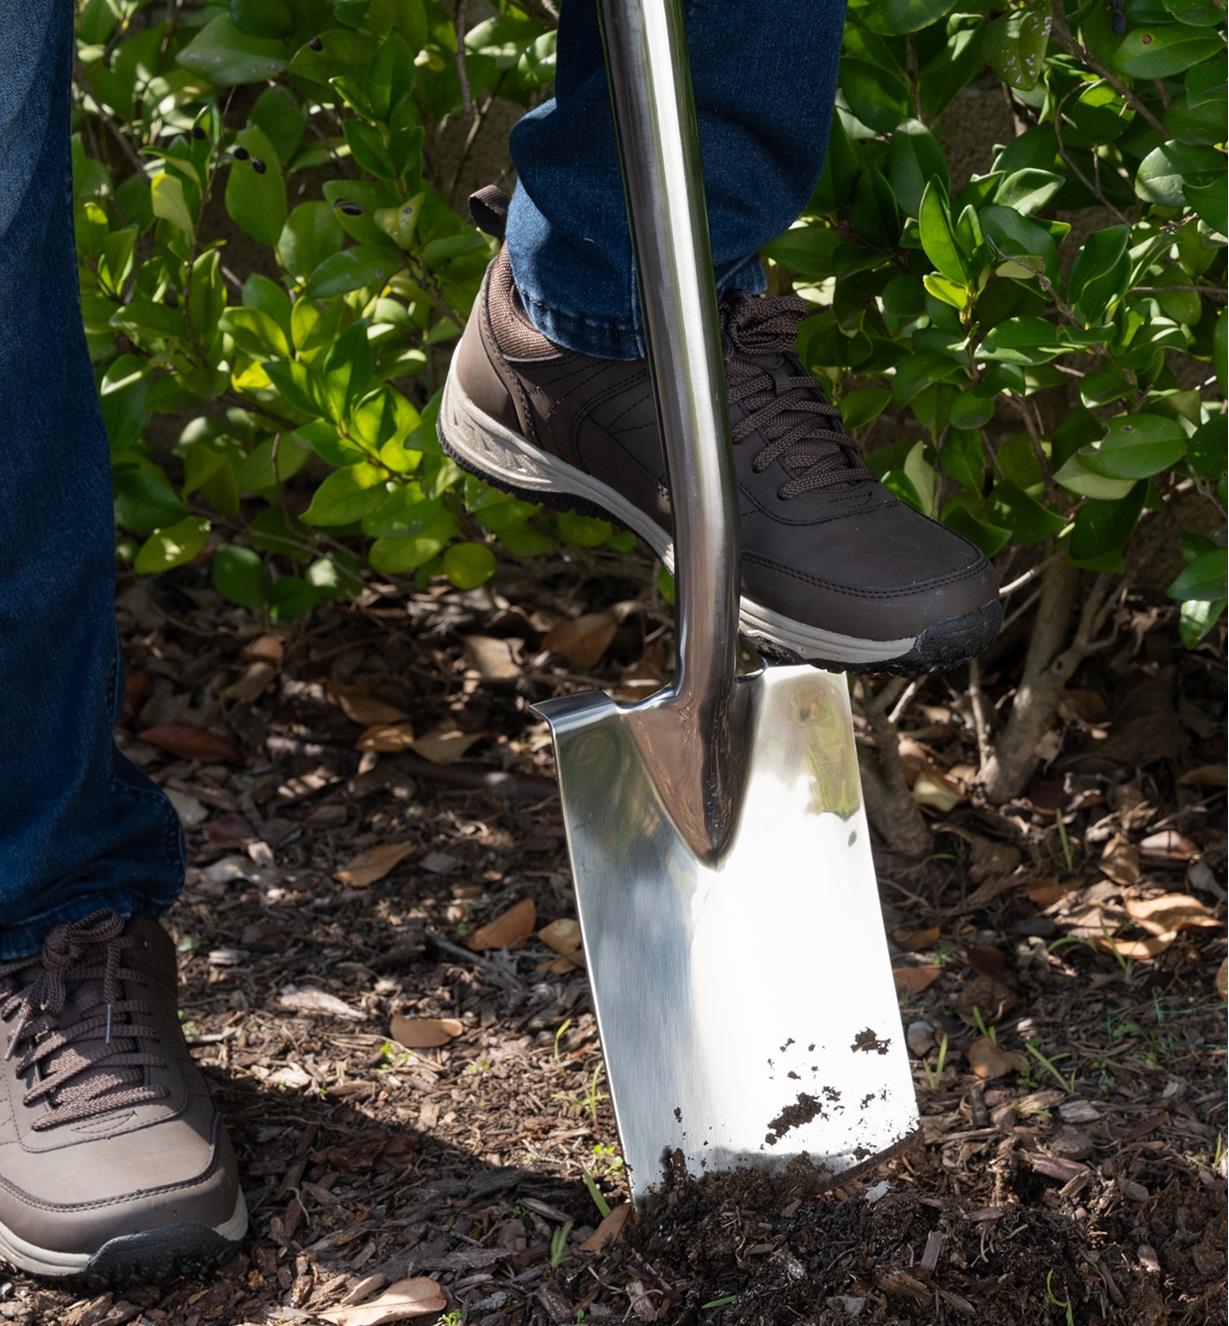 A gardener uses their foot to push the head of the border spade into the ground